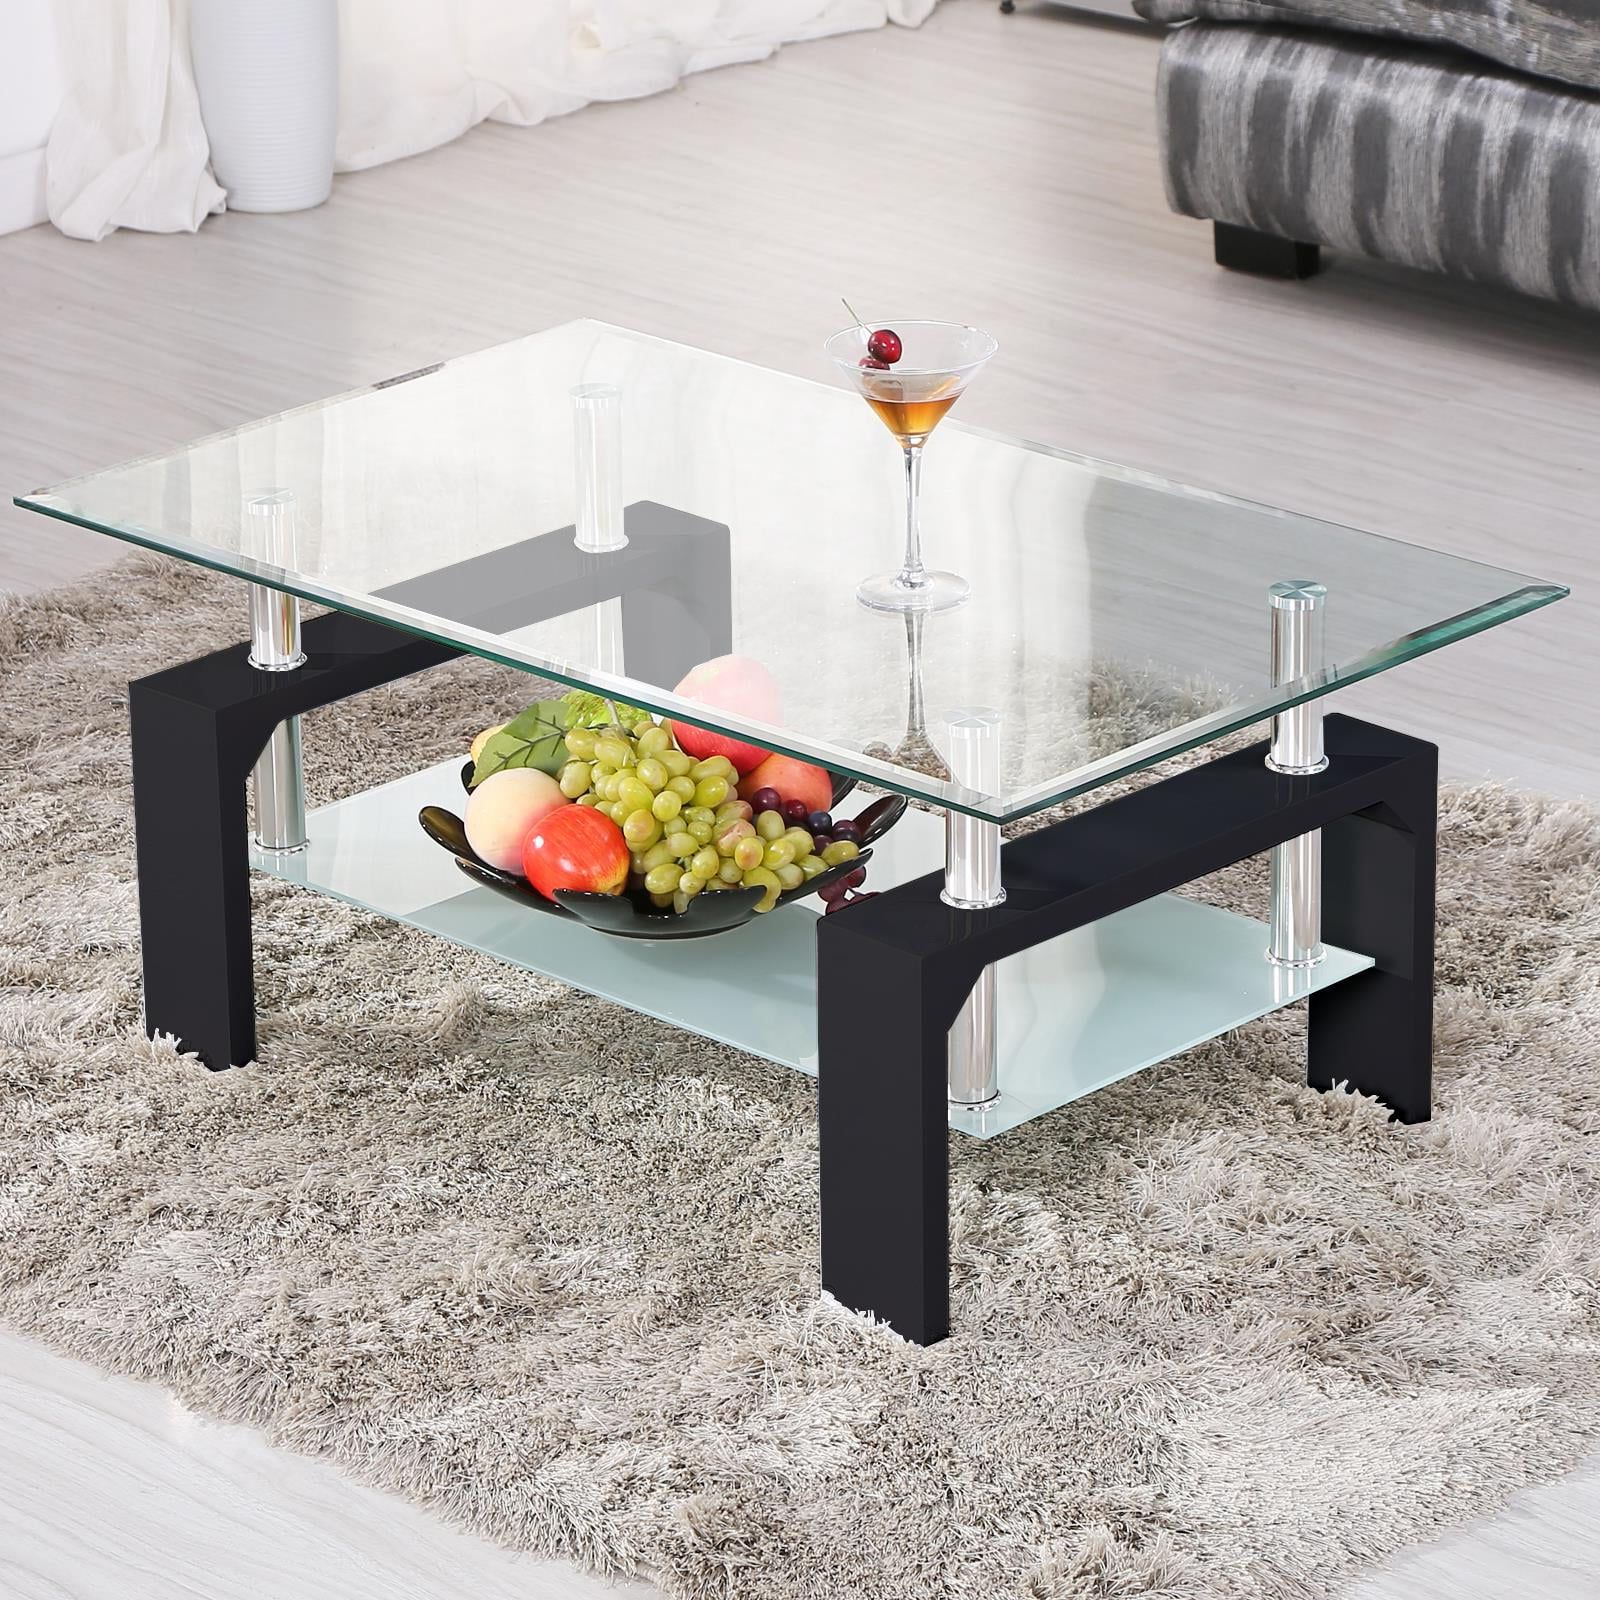 2020 Ktaxon Rectangular Glass Coffee Table Shelf Wood Living Room Furniture Throughout Wood Tempered Glass Top Coffee Tables (View 12 of 15)